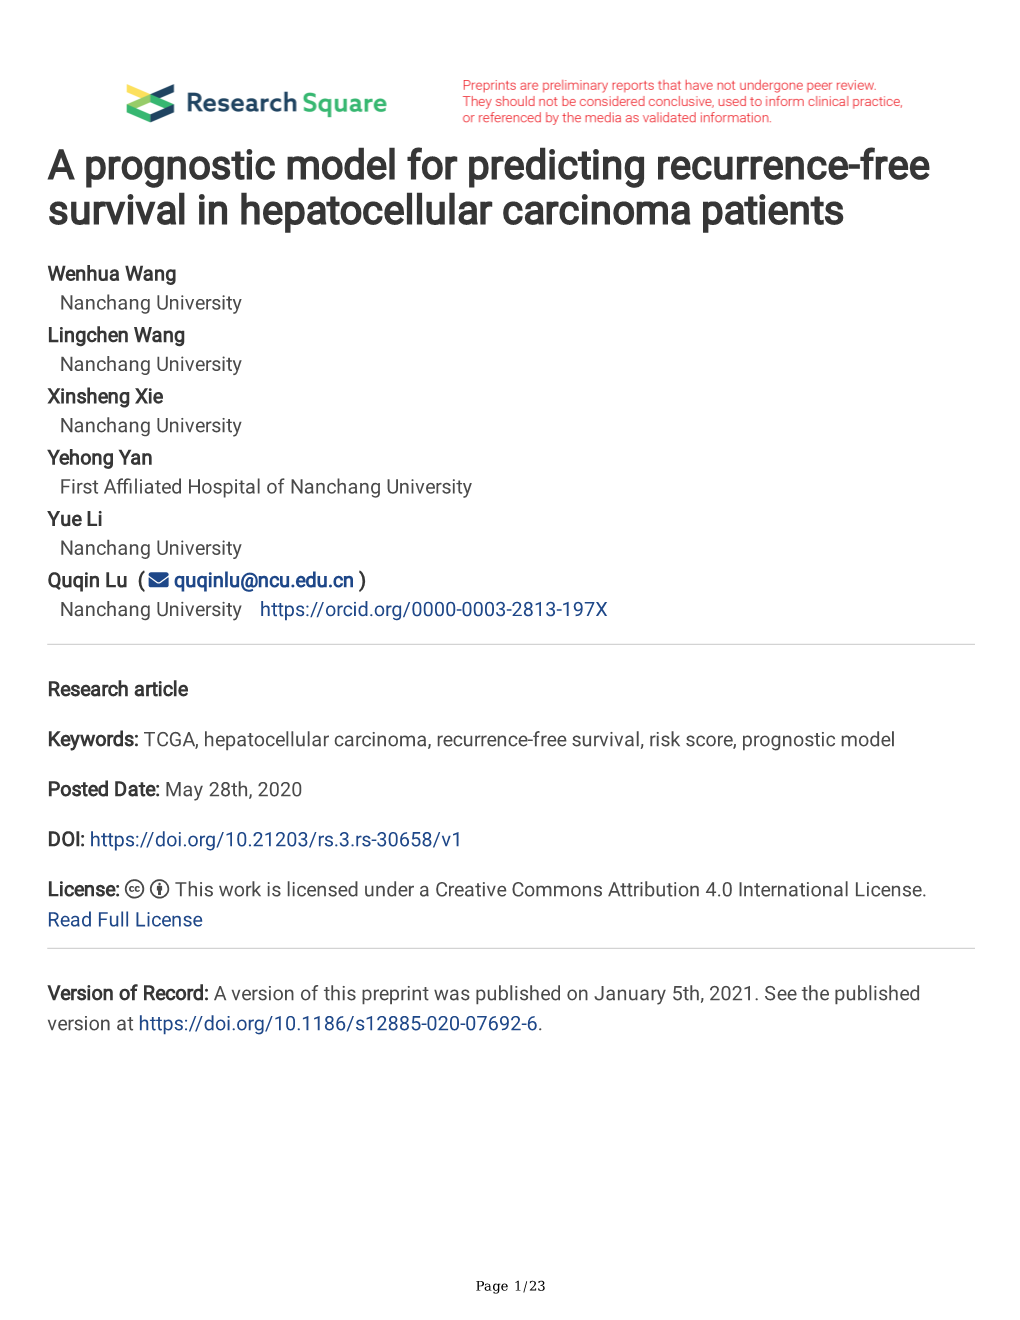 A Prognostic Model for Predicting Recurrence-Free Survival in Hepatocellular Carcinoma Patients